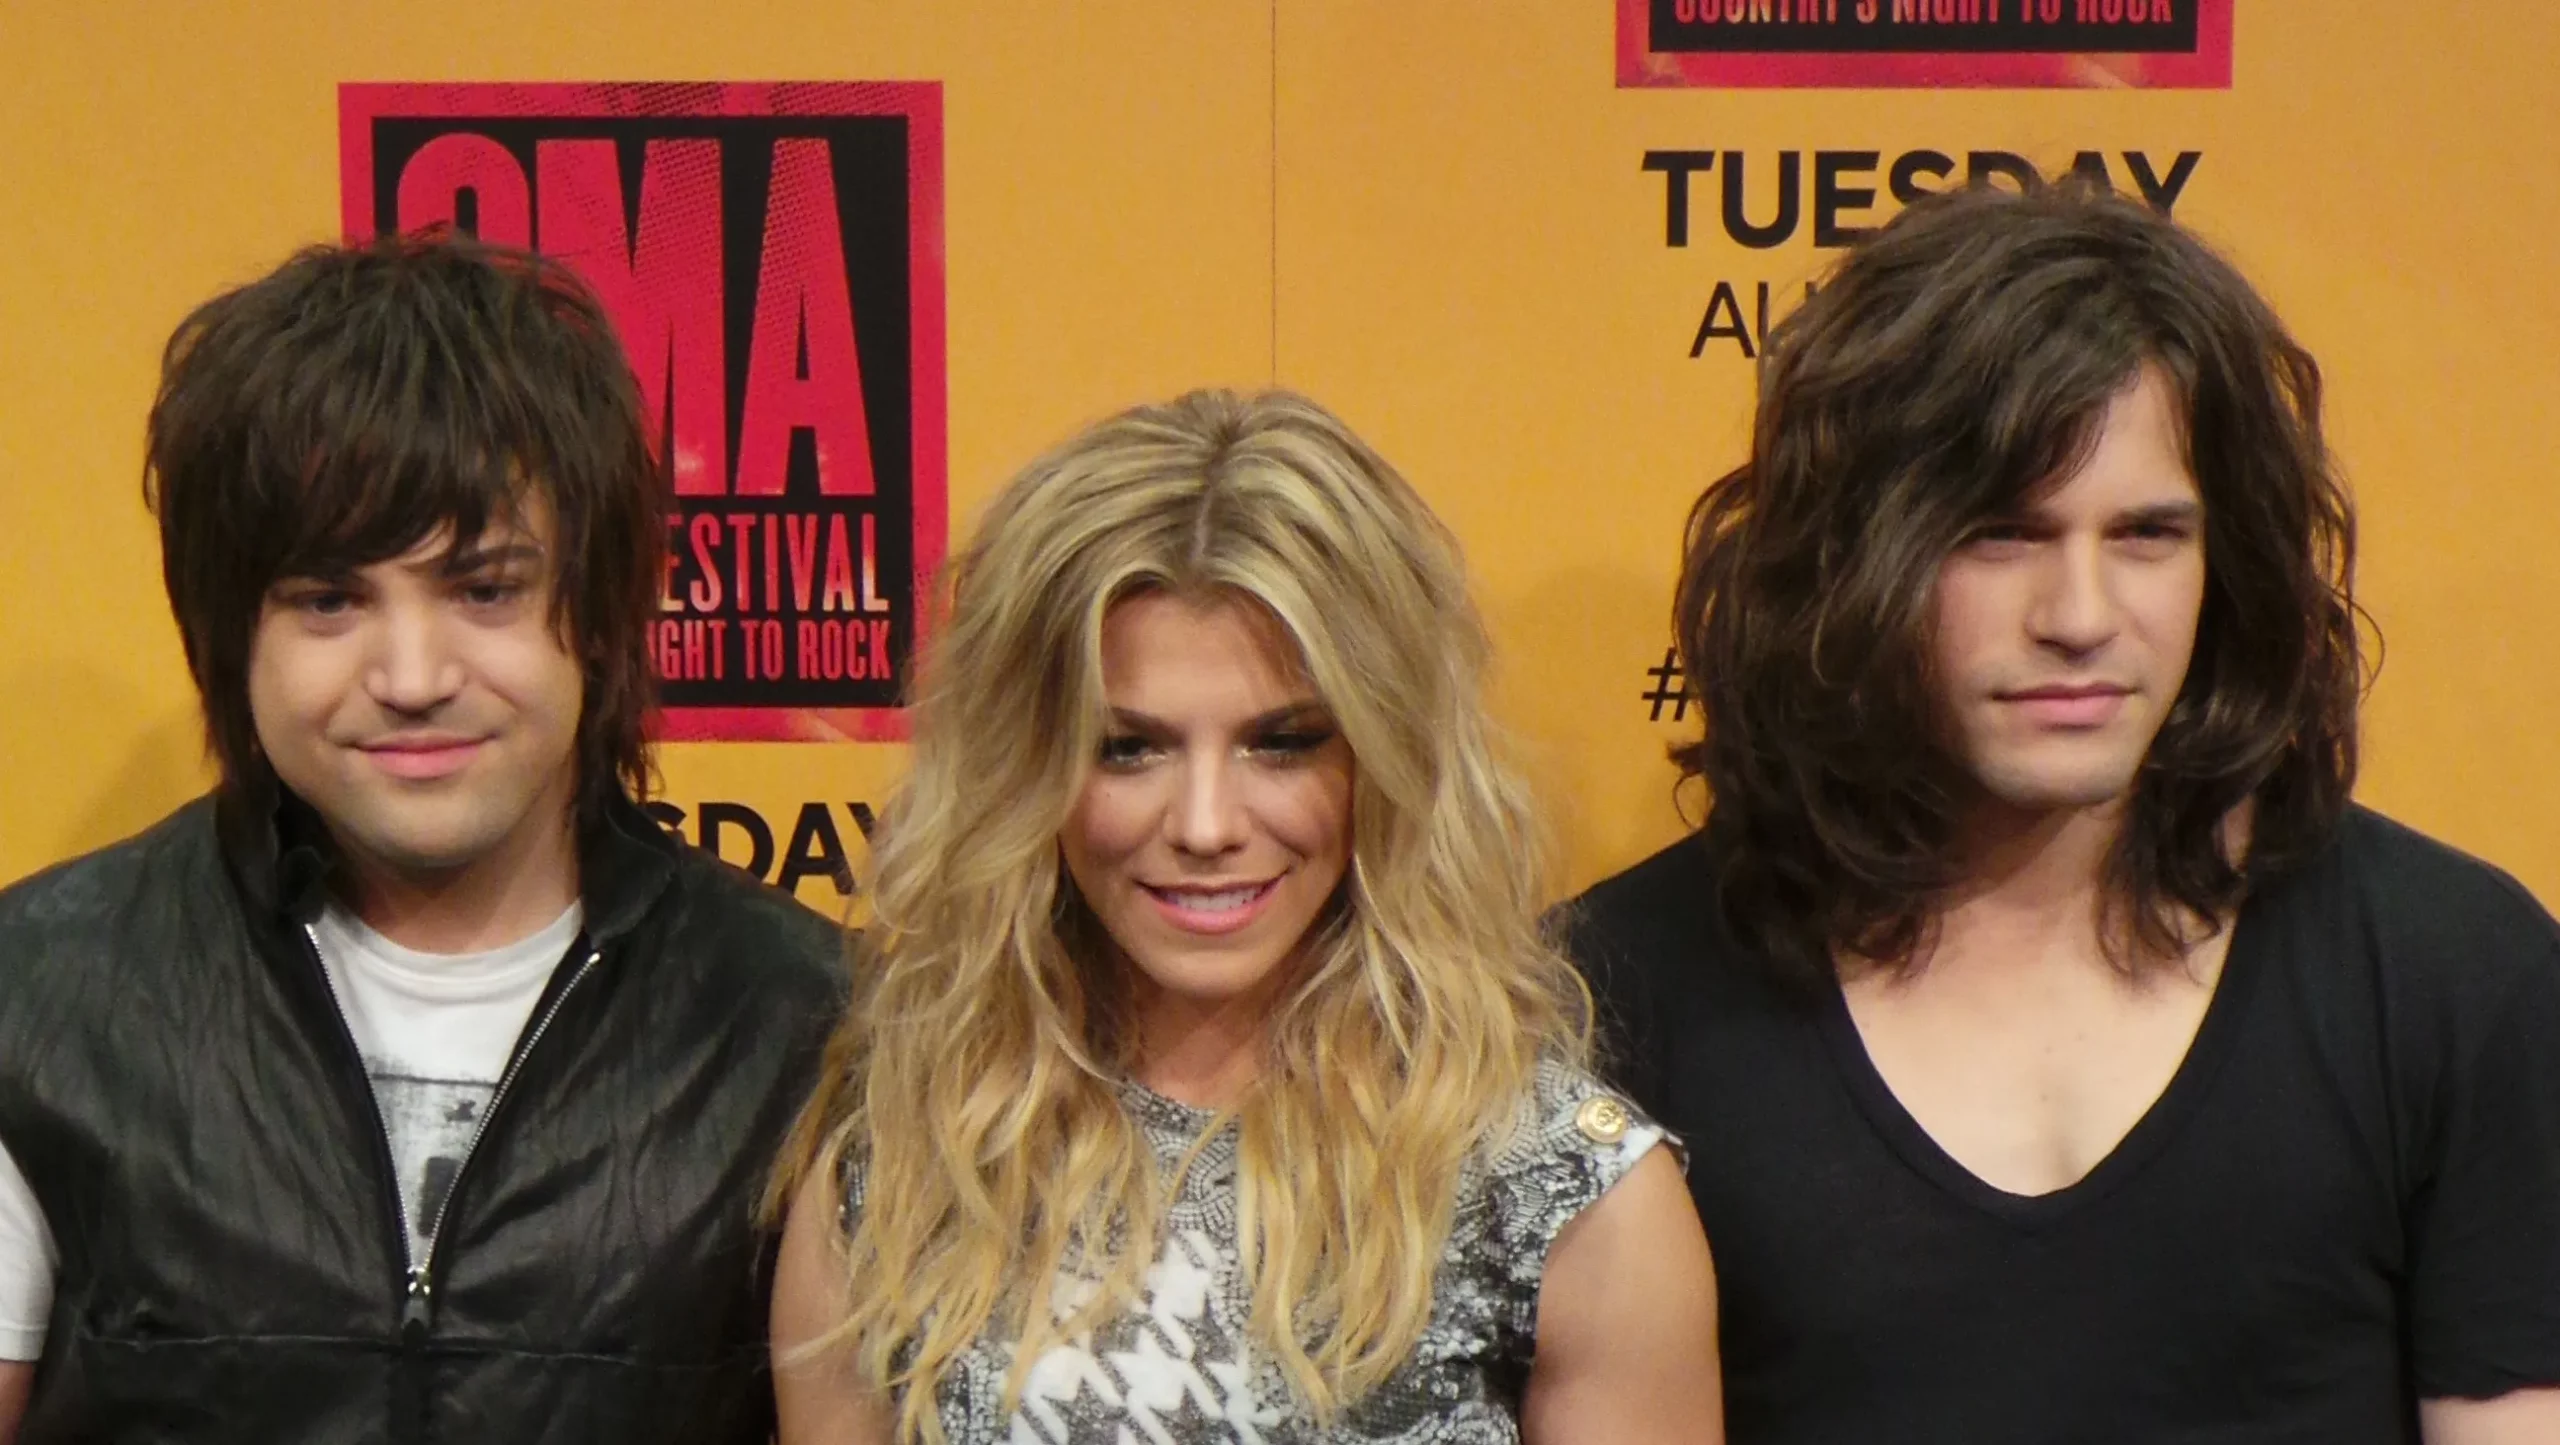 The band Perry